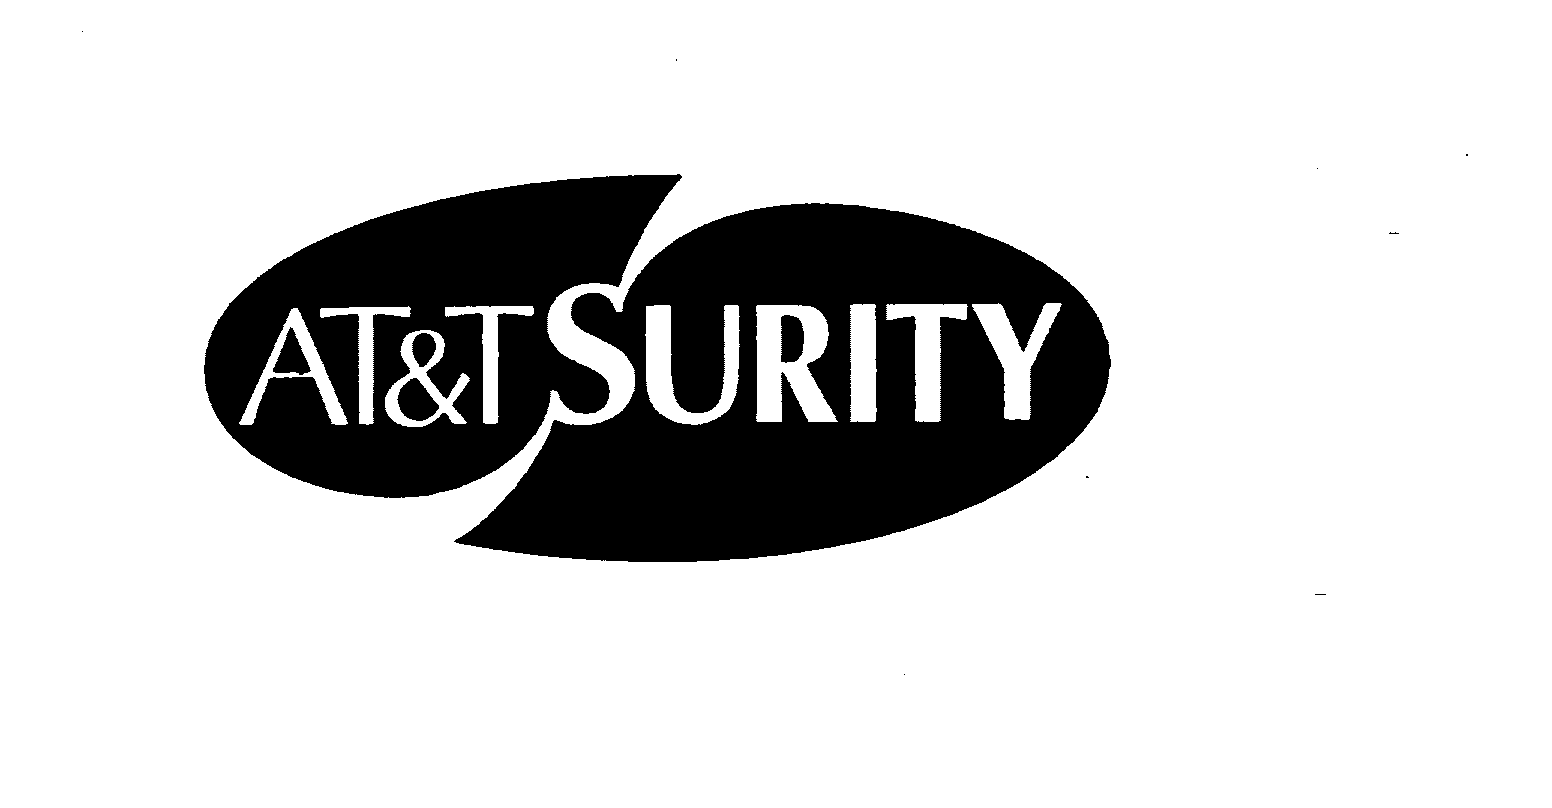  AT&amp;T SURITY